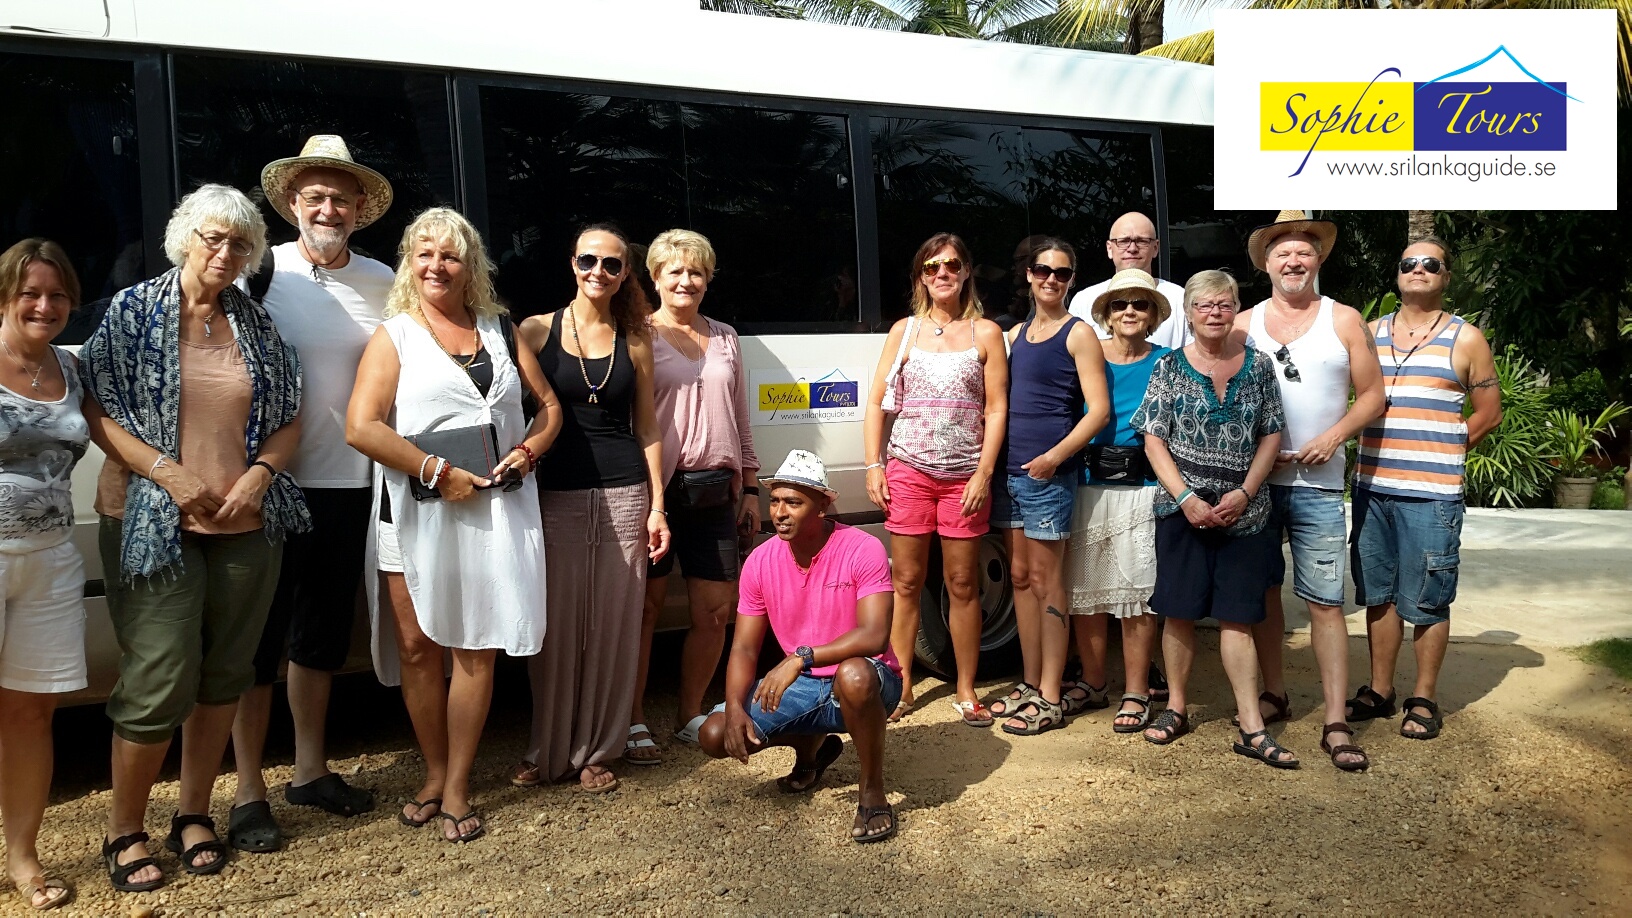 An image of summery dressed tourists, in front of a white bus, with the Sophie Tours logo on it. Jungle looms in the background.